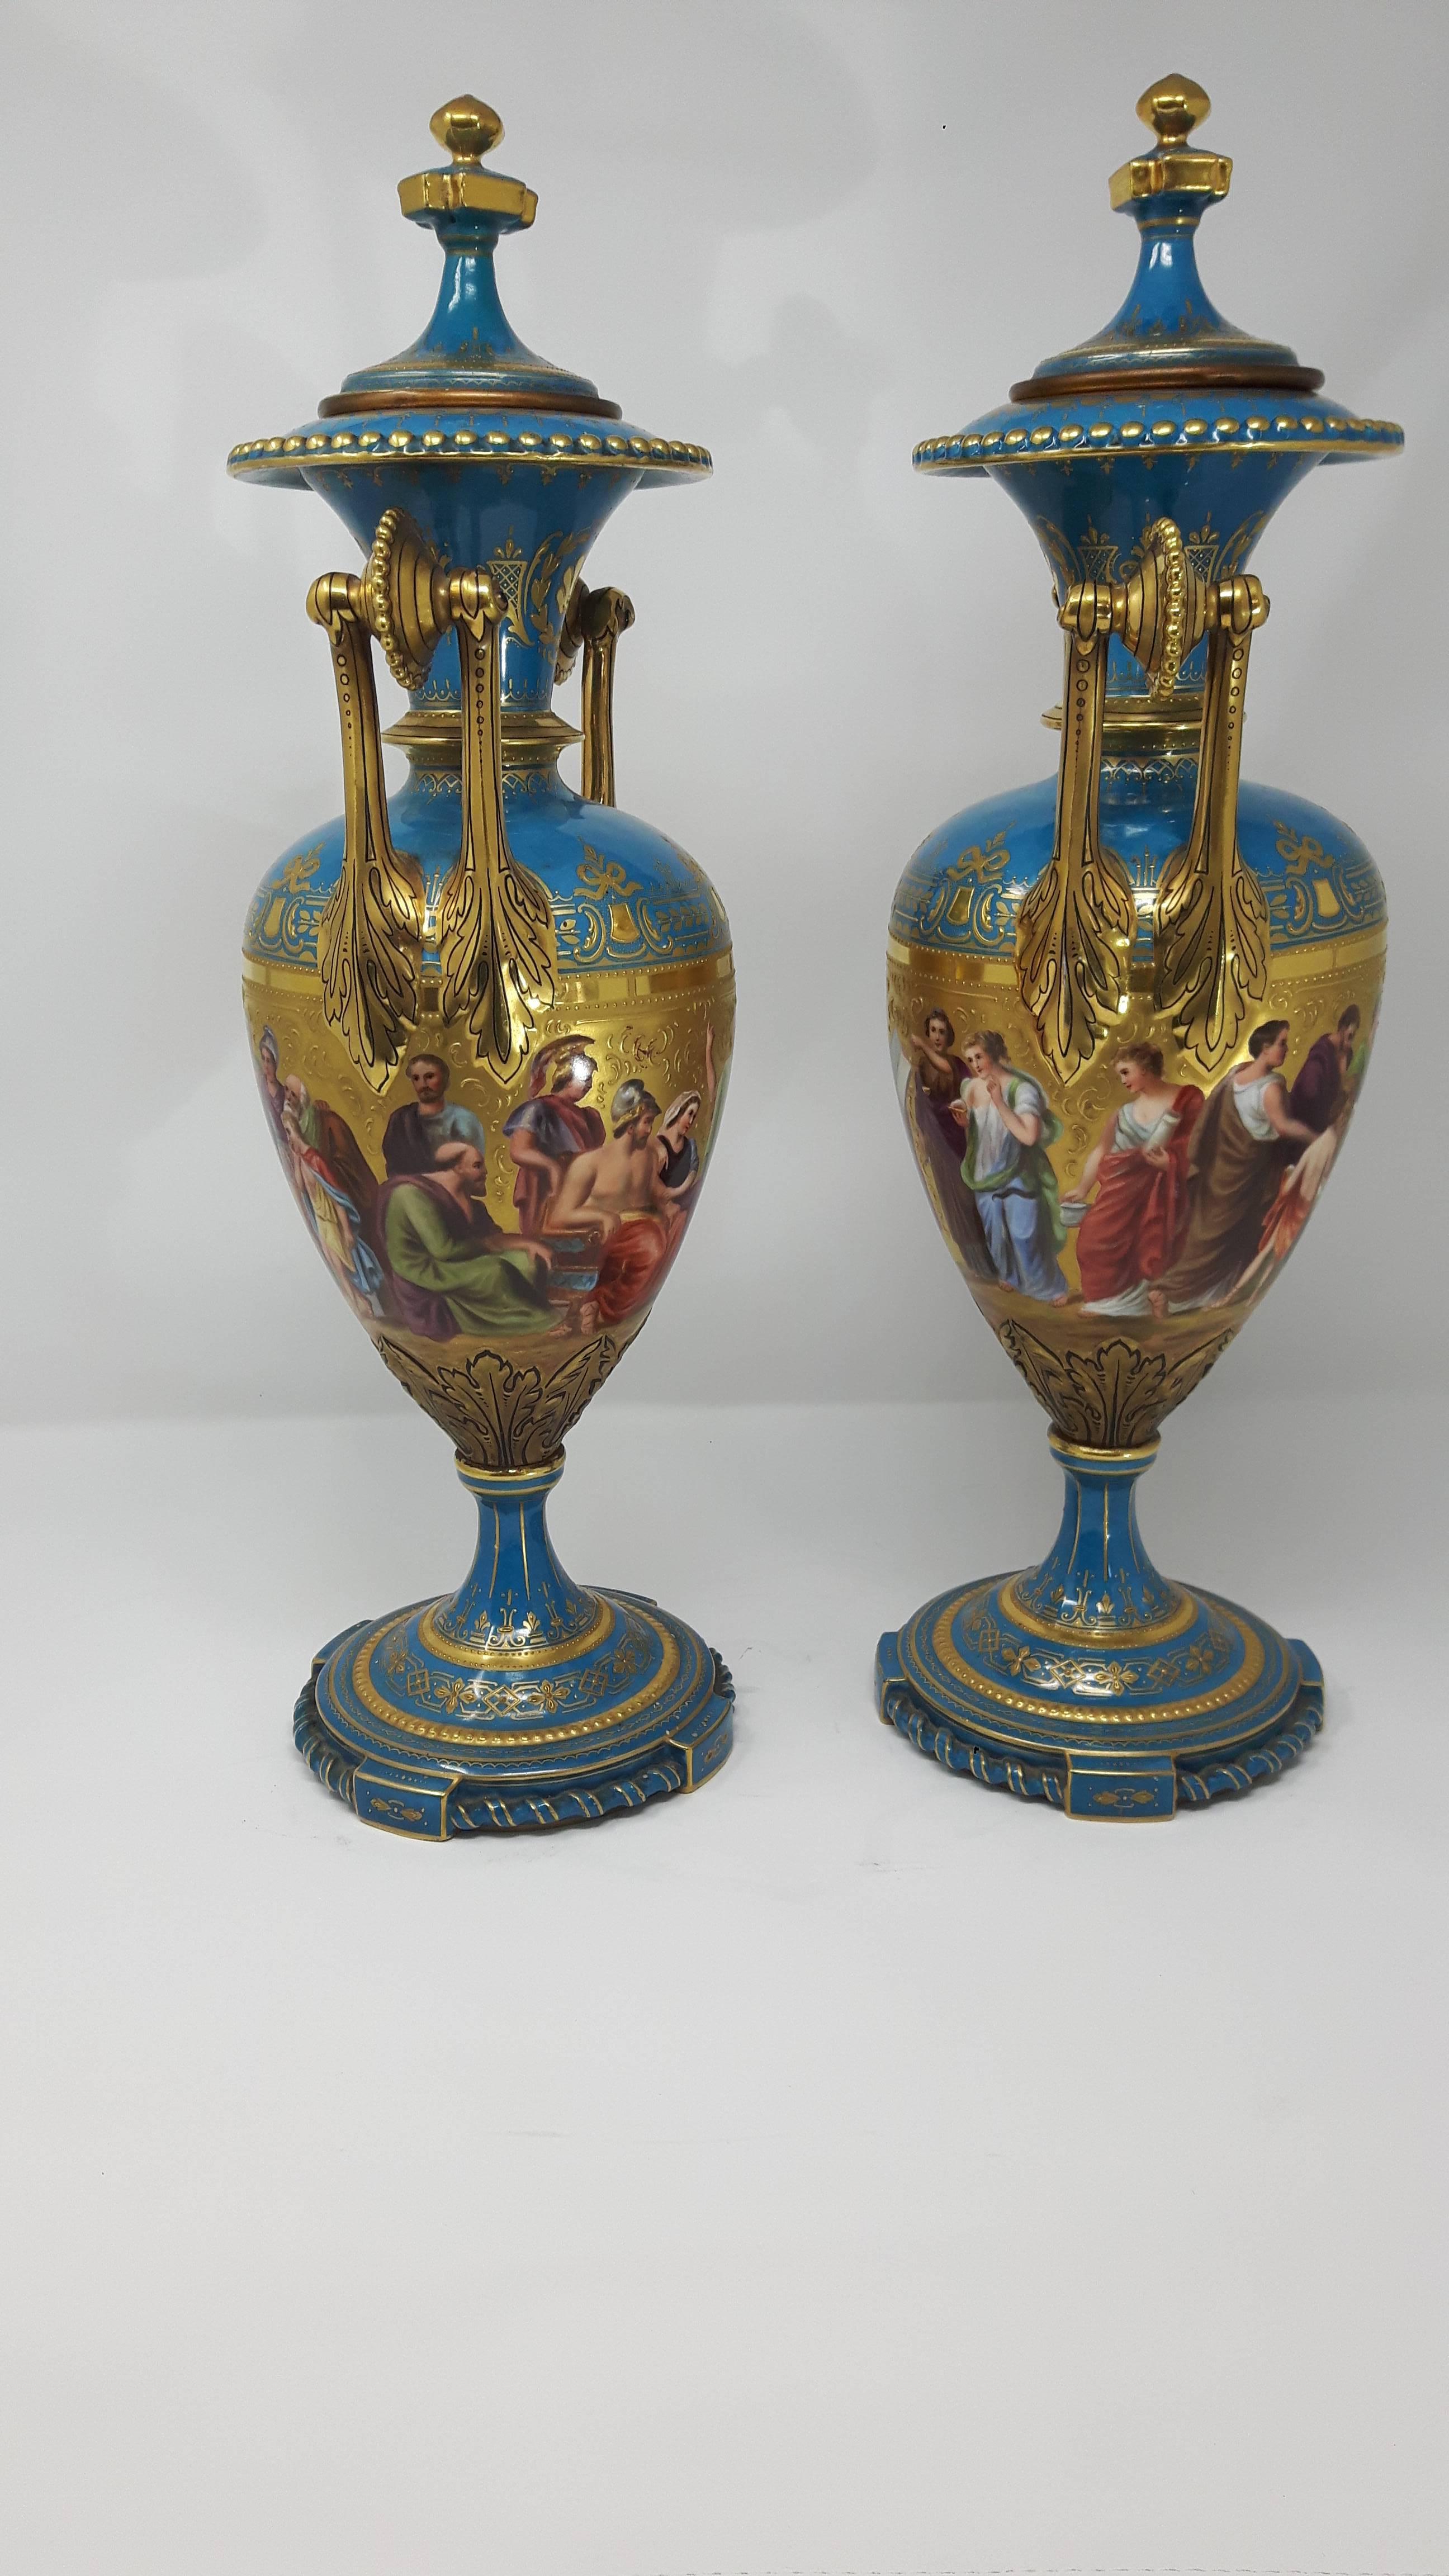 Pair of late 19th century Vienna vases. Each vase is finely painted with continuous reserve of classical allegorical figures on a gold background.